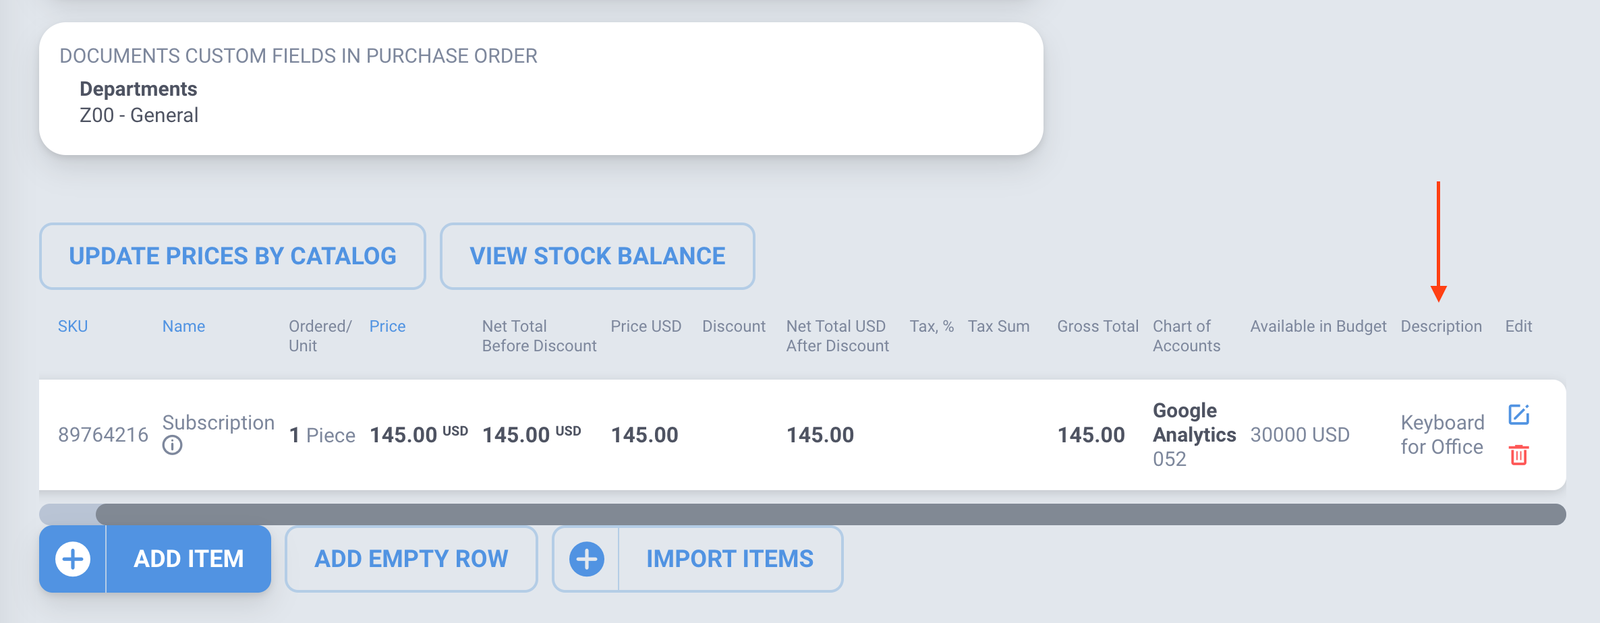 Item Description Field in the Purchase Order